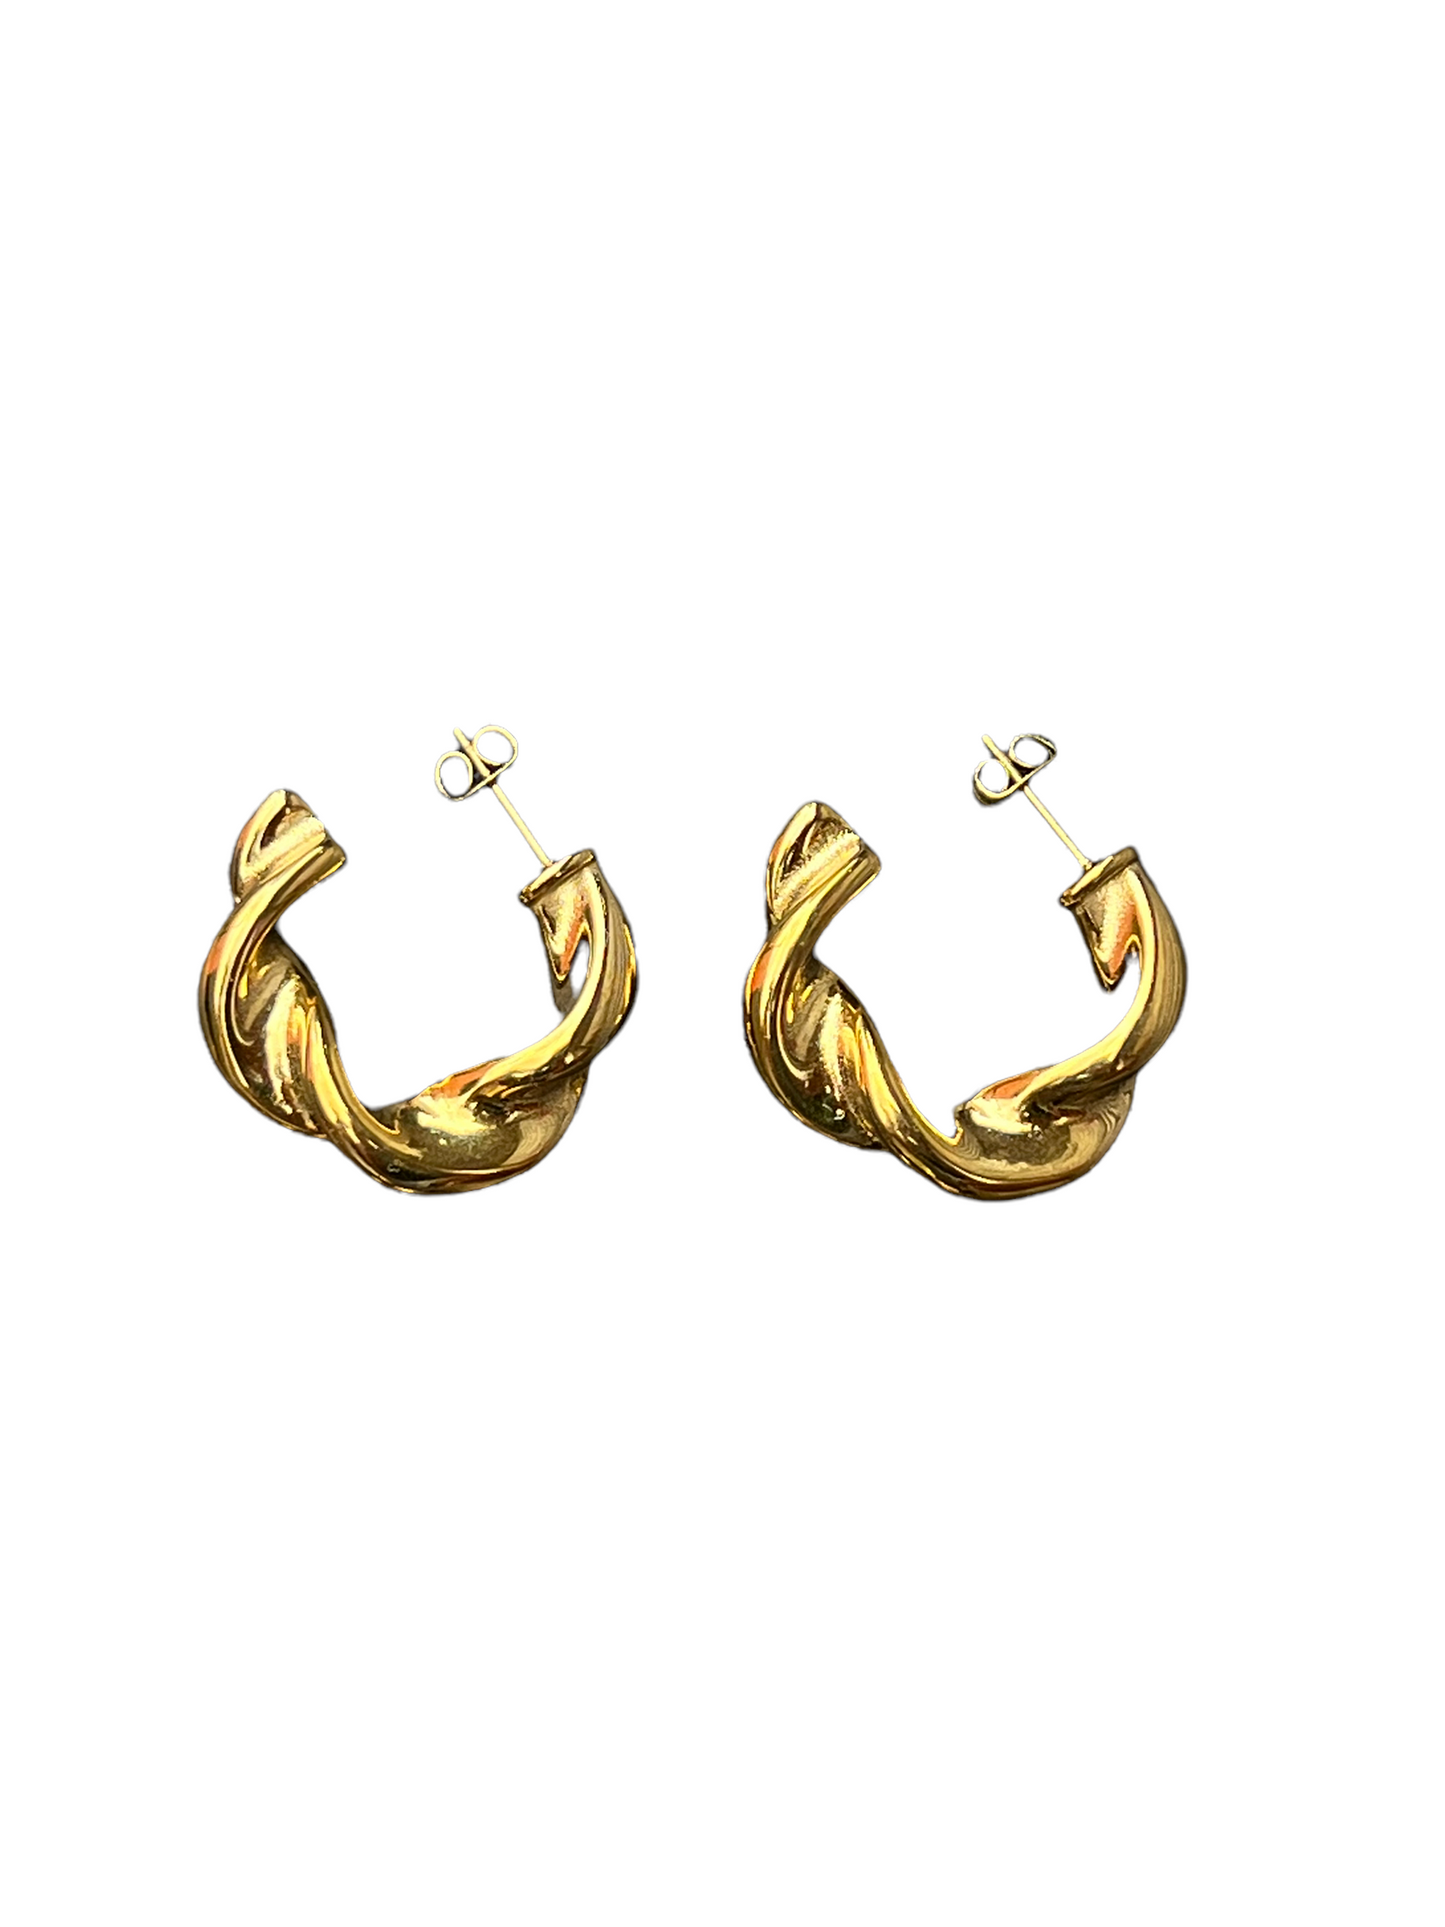 14K Gold Plated Braided Hoops